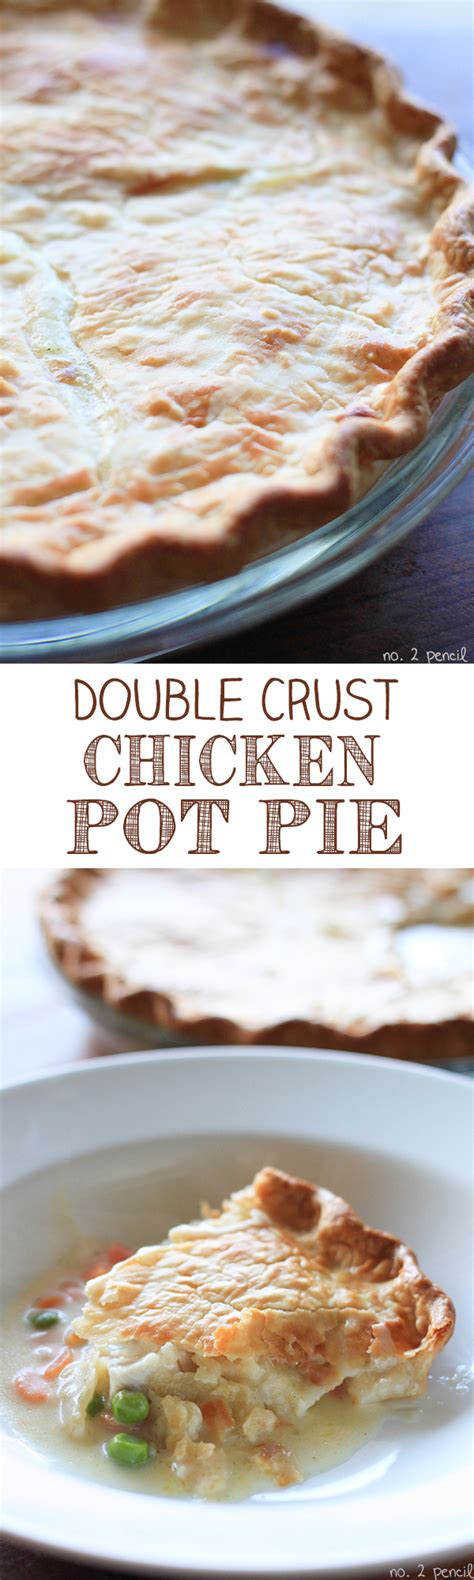 Use this as a guide to cut 3 more hearts from the re. Double Crust Chicken Pot Pie - Great Freezer Meal Idea